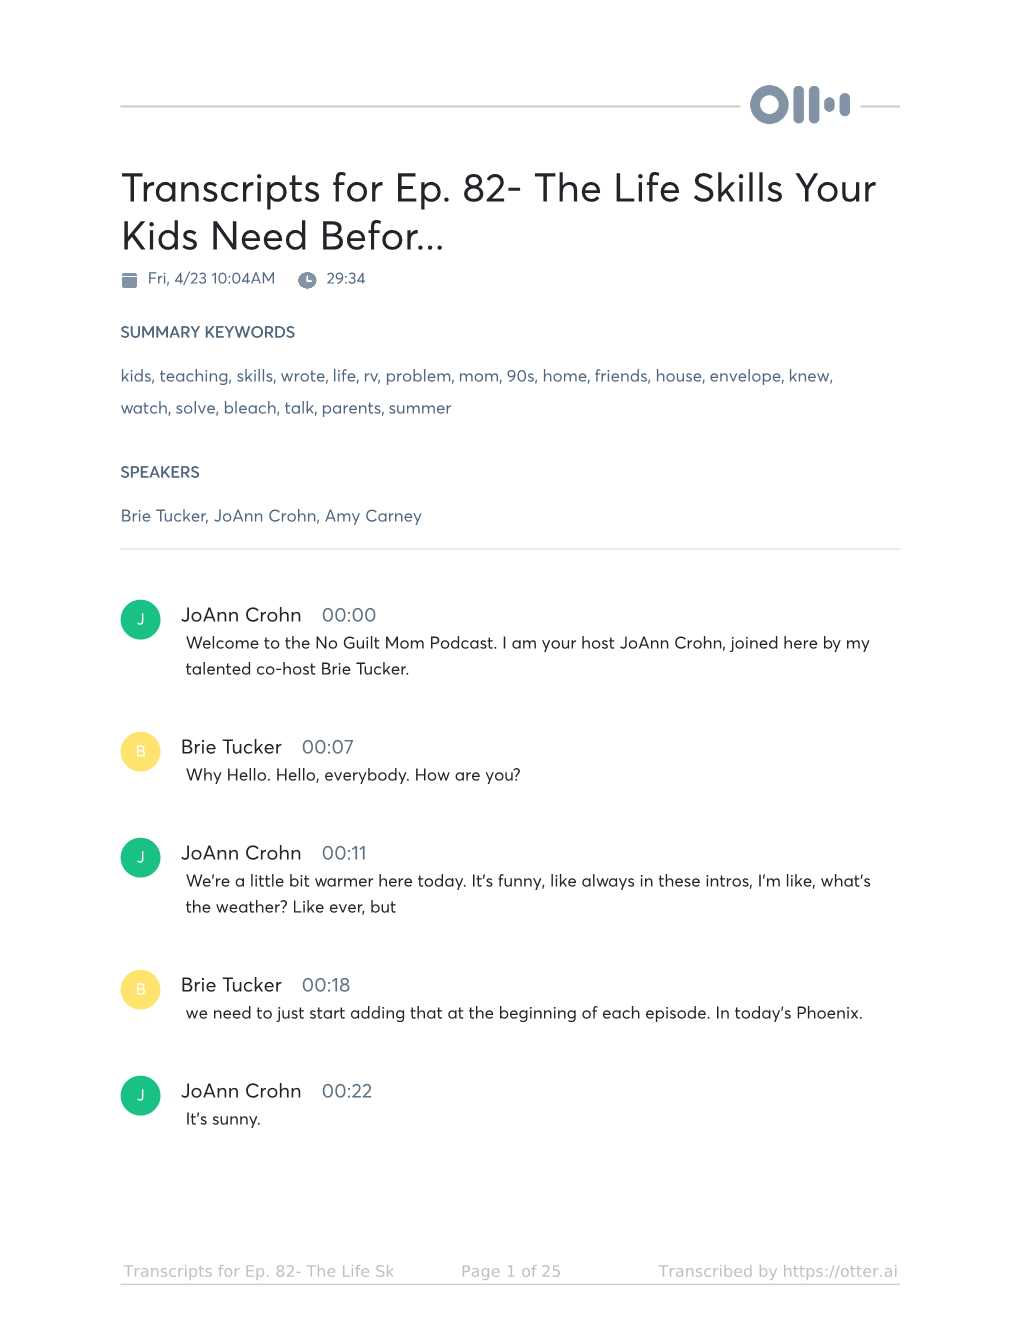 Transcripts for Ep. 82- the Life Skills Your Kids Need Befor